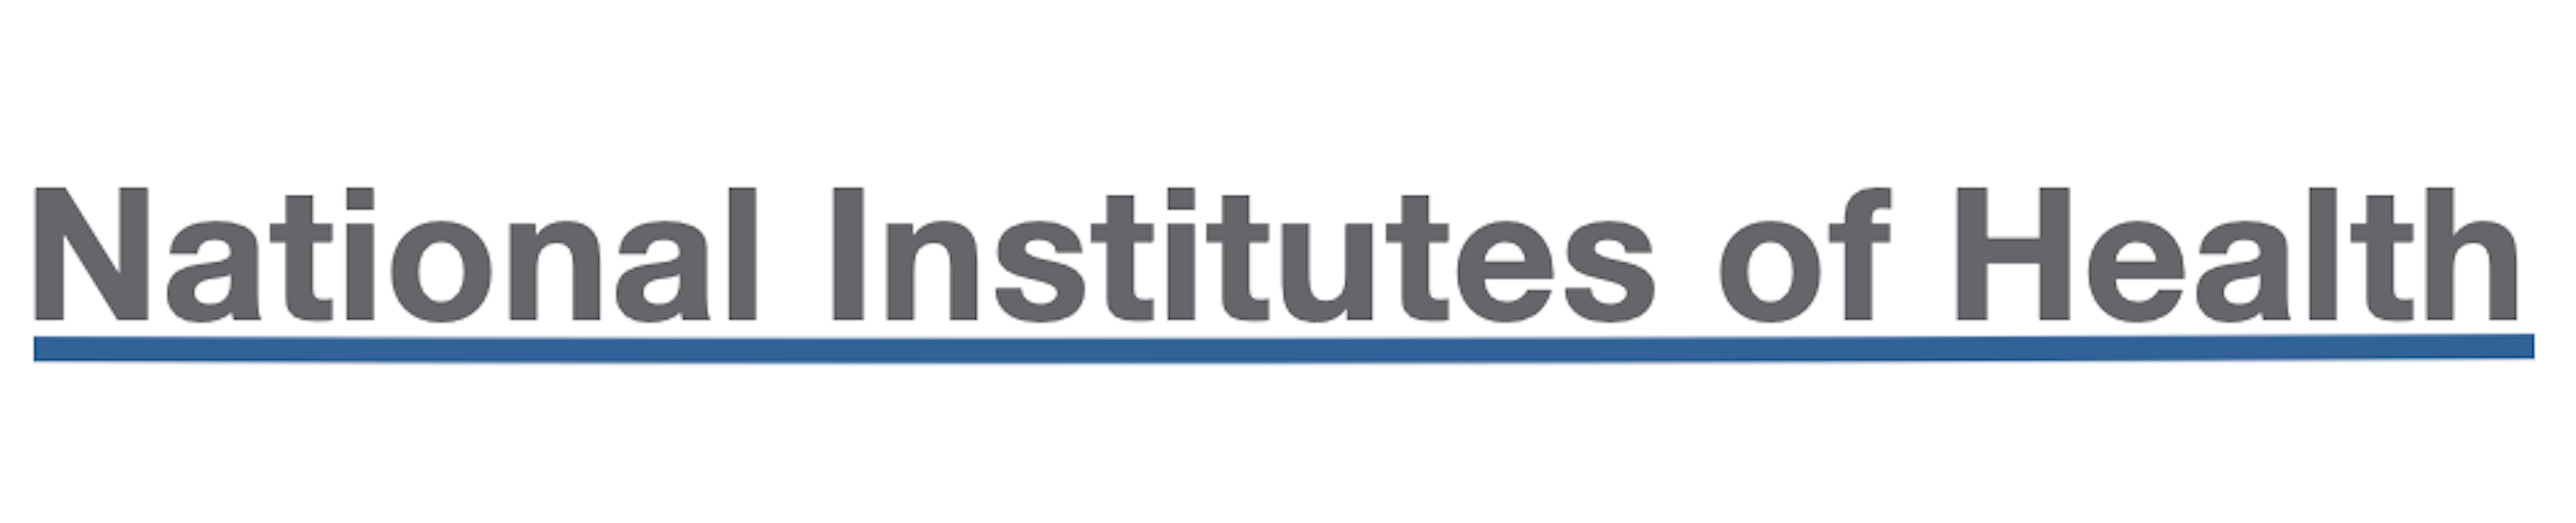 National Institutes of Health Unofficial Logo